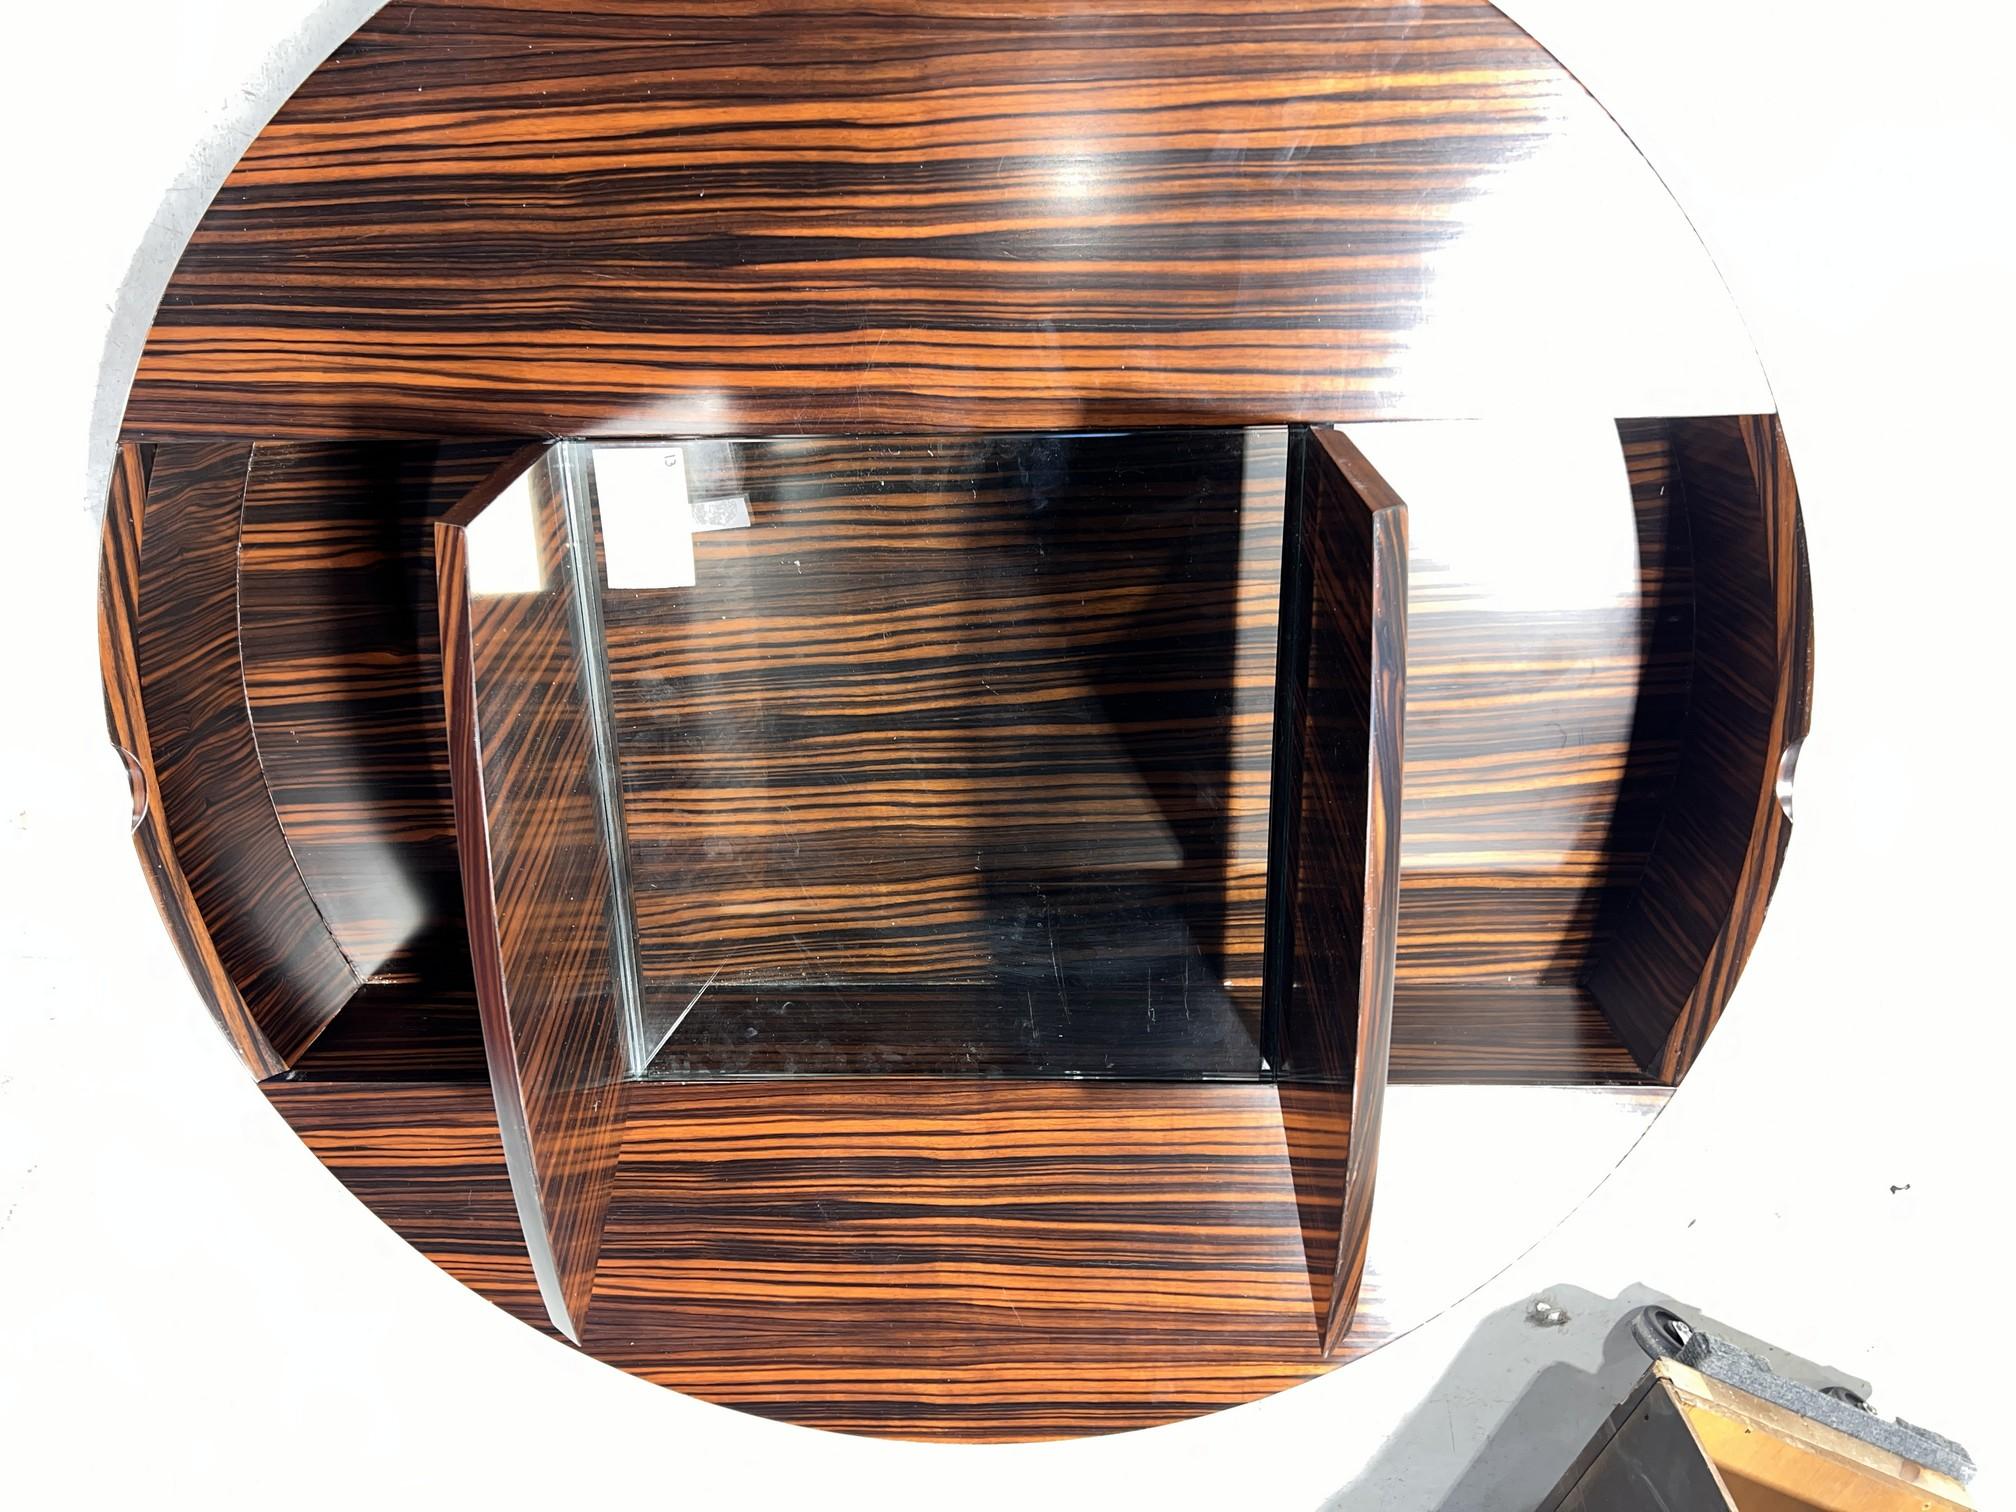 Round Coffee Table in Ebony Makassar with Center Opening for Displays - 47.5" in Diameter